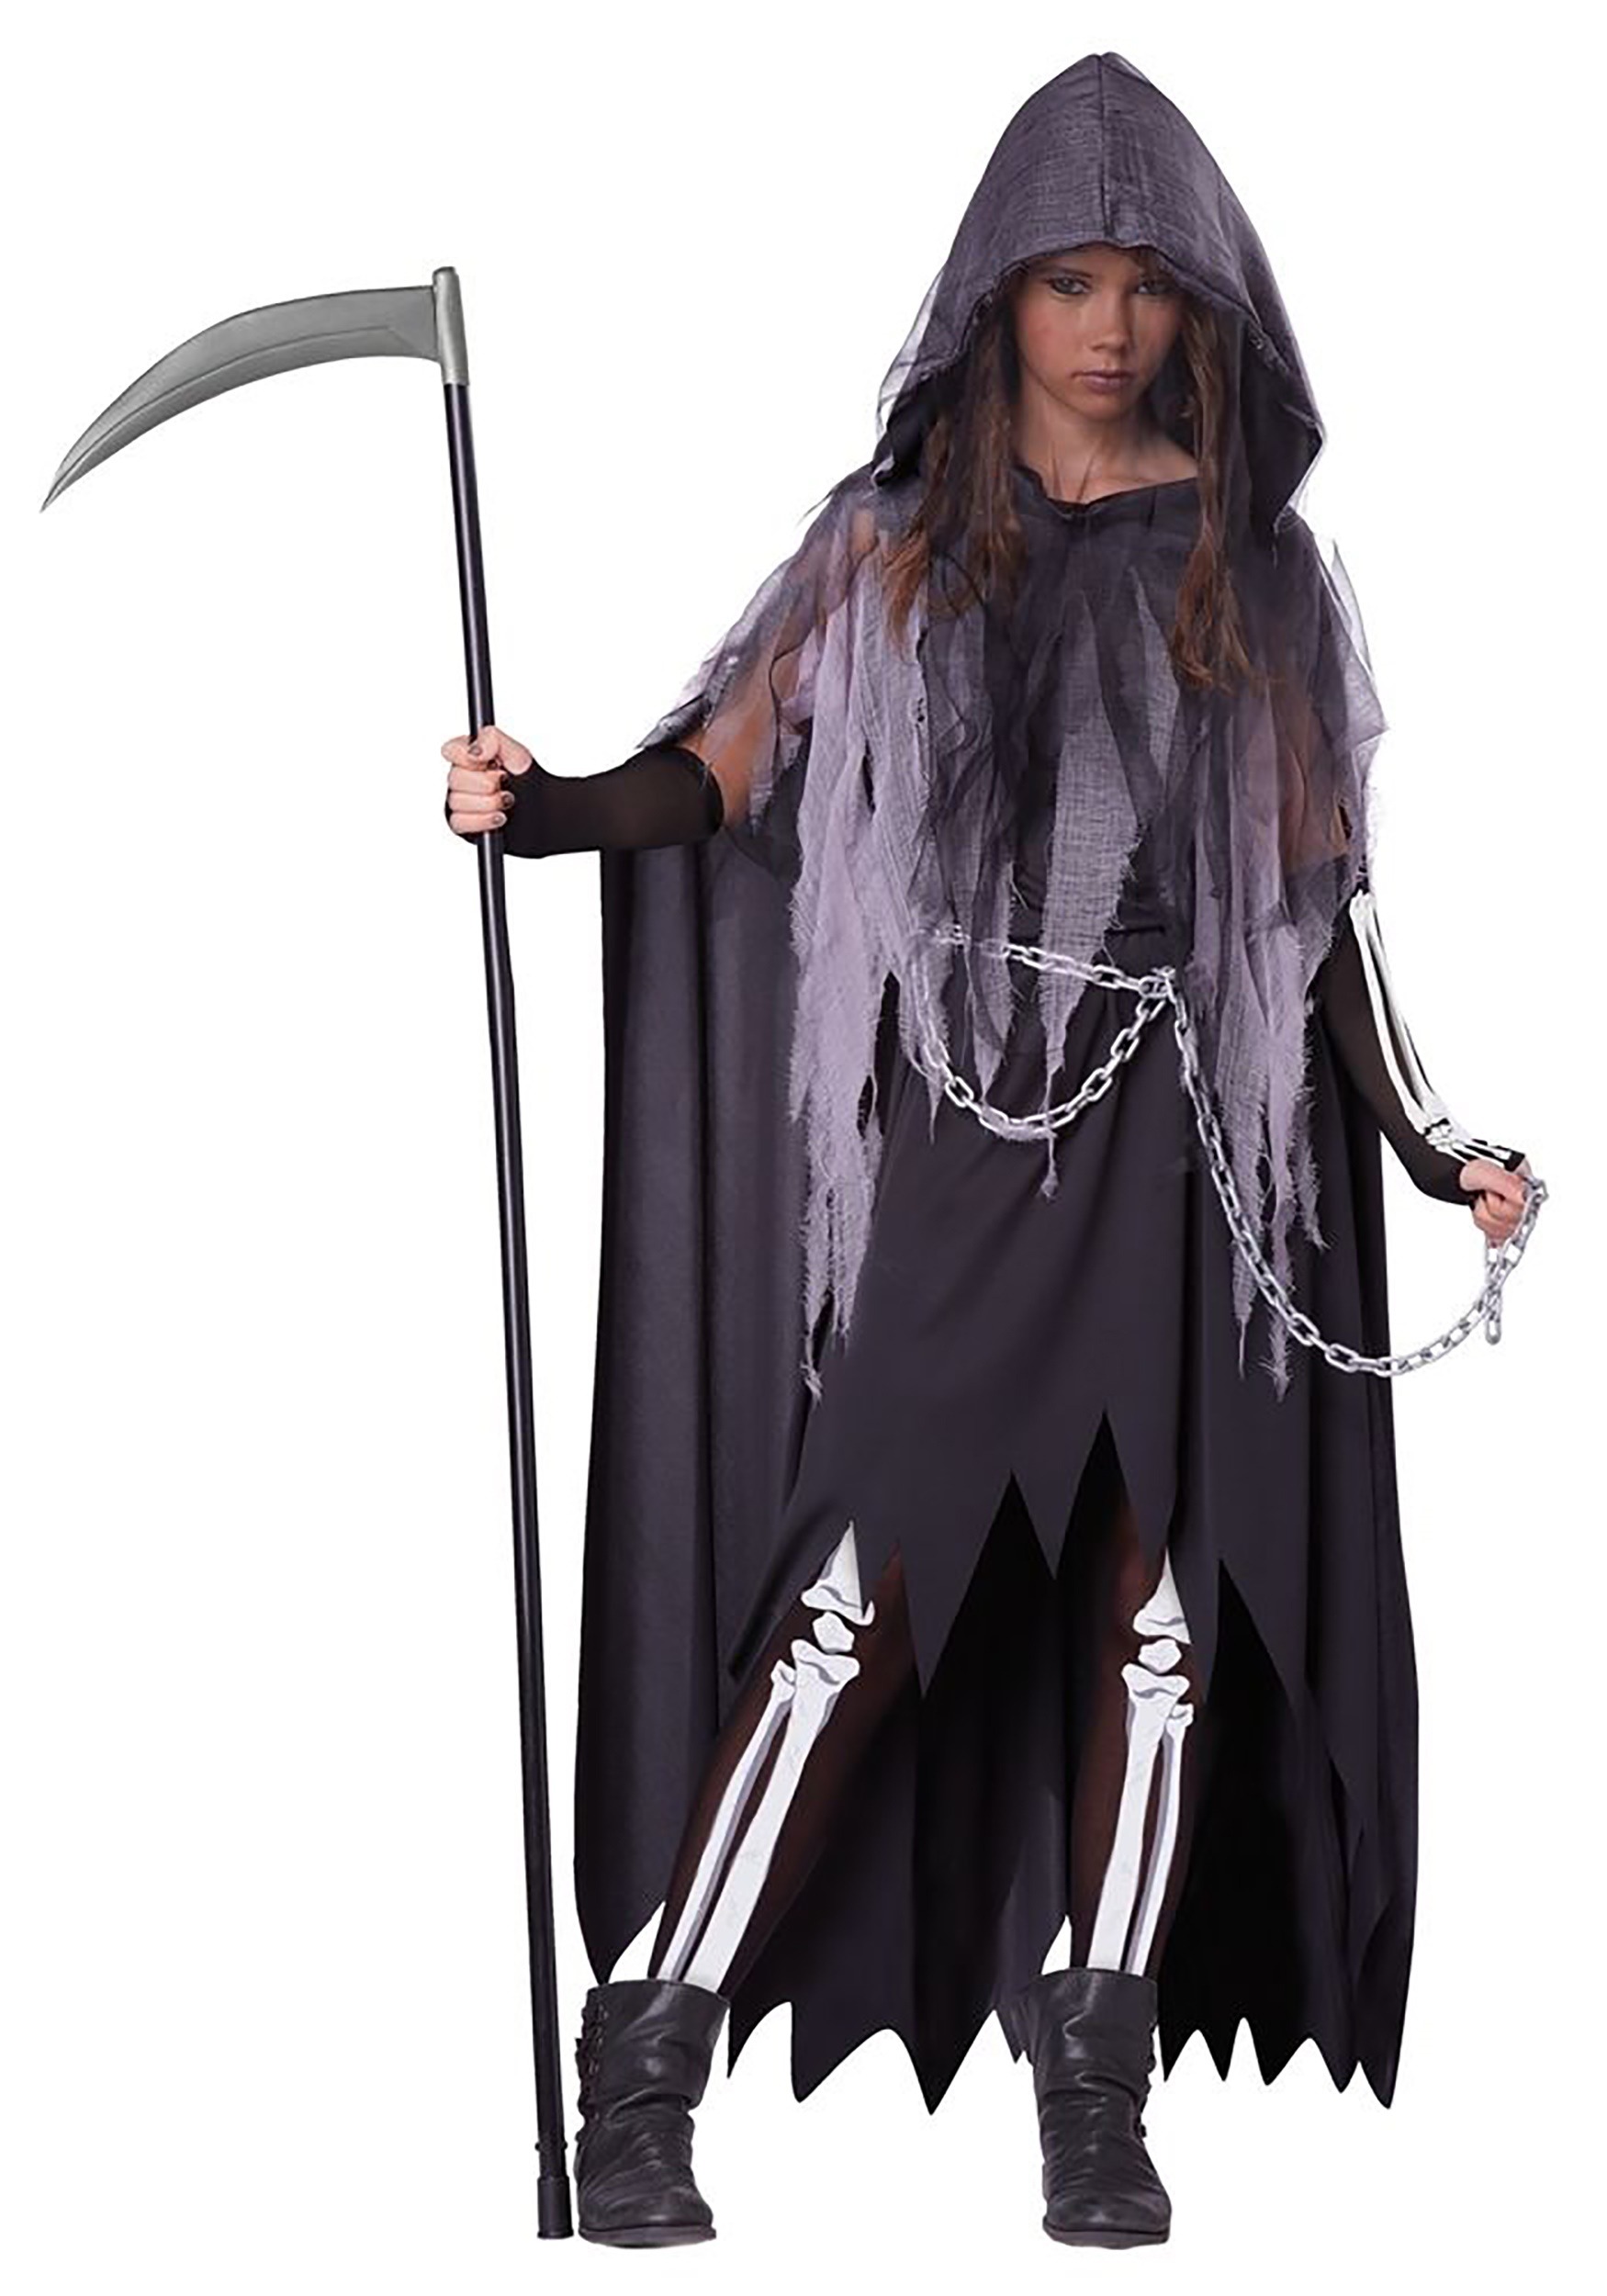 Photos - Fancy Dress California Costume Collection Miss Tween Reaper Costume | Gothic Cosplay B 